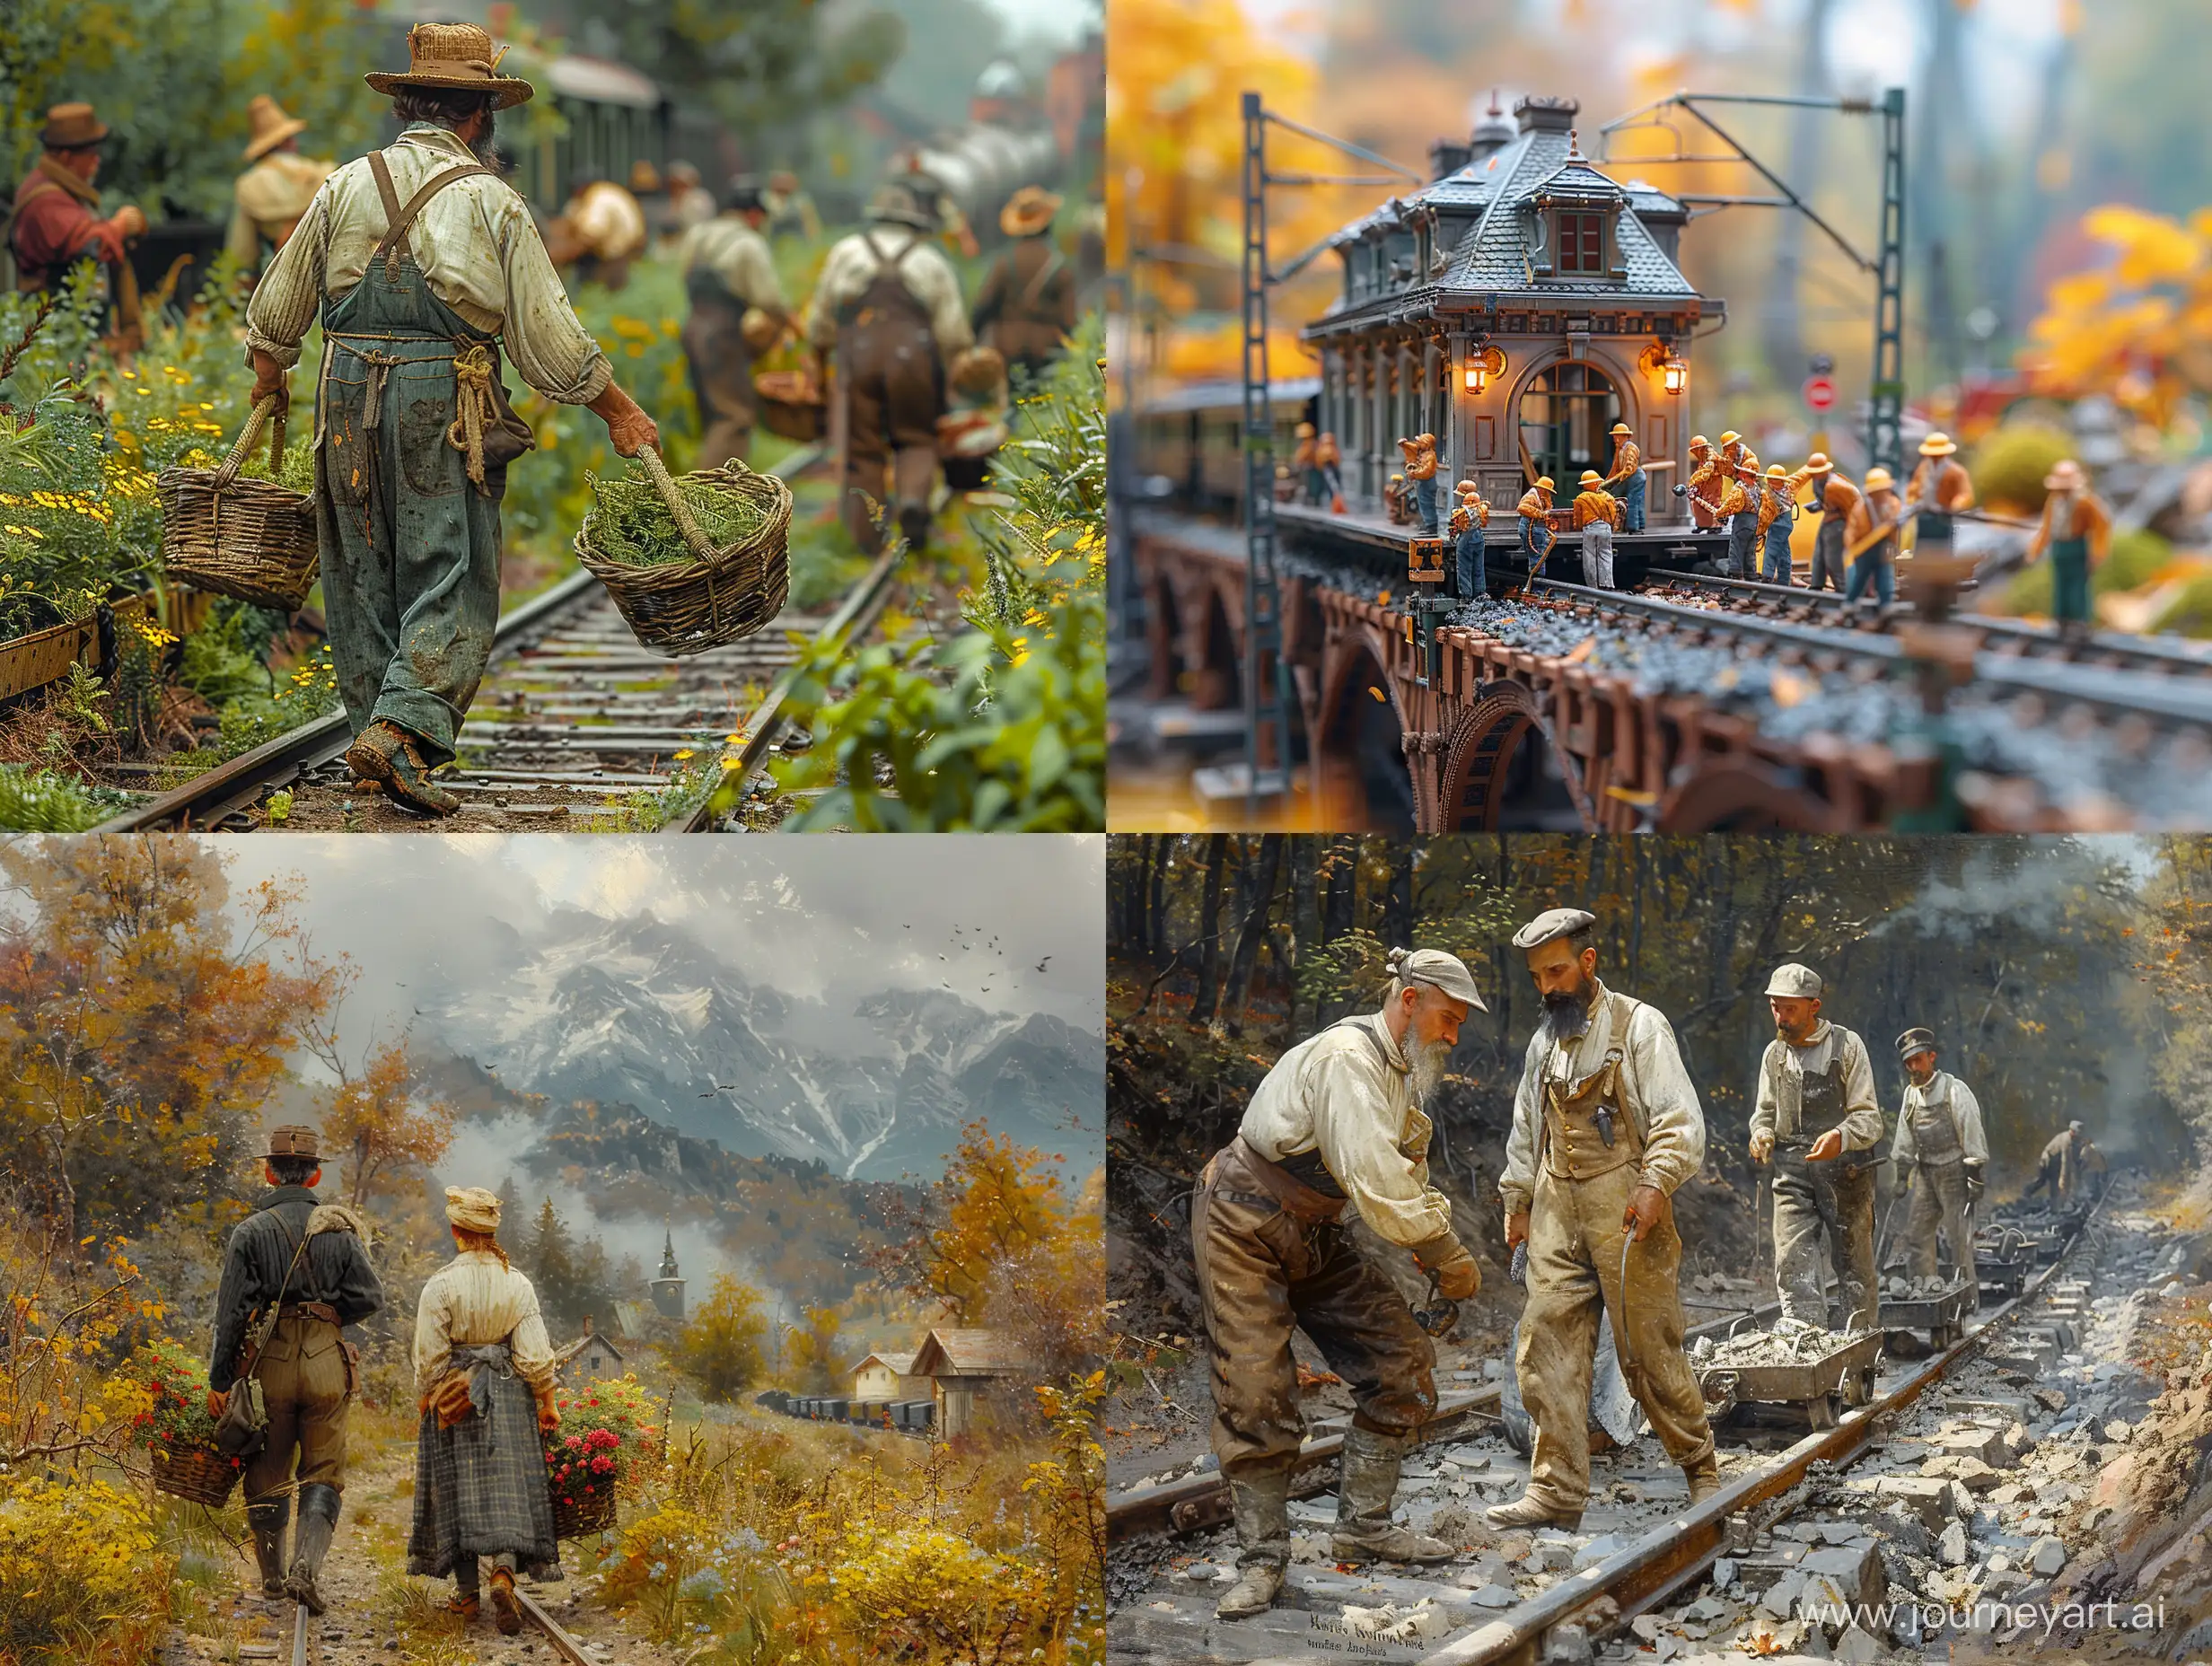 Authentic-Railway-Workers-in-1845-Daily-Labor-Amidst-Realism-and-Precision